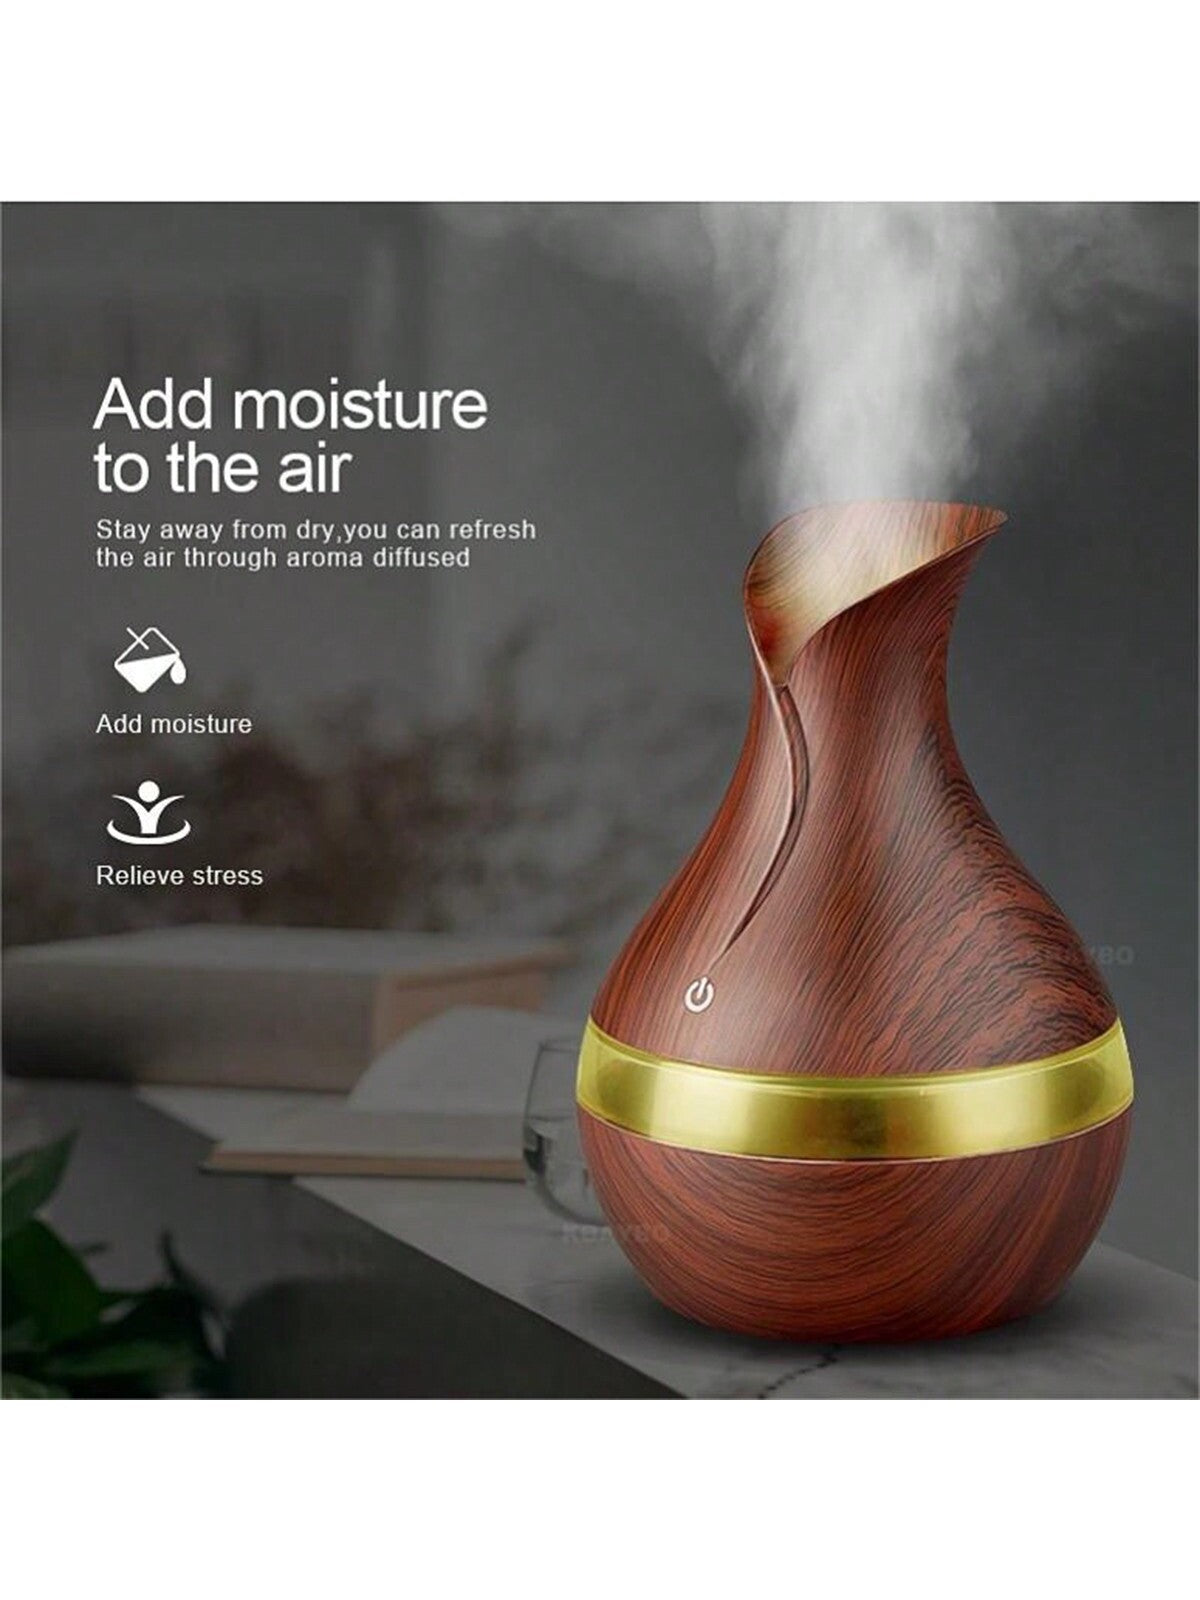 1pc Portable Usb Desktop Wood-grain Color Flowerpot Humidifier, Aromatherapy Diffuser, Water Replenishing Device, Air Purifier Suitable For Home, Bedroom, Outdoor, Travel-dark wood color-5